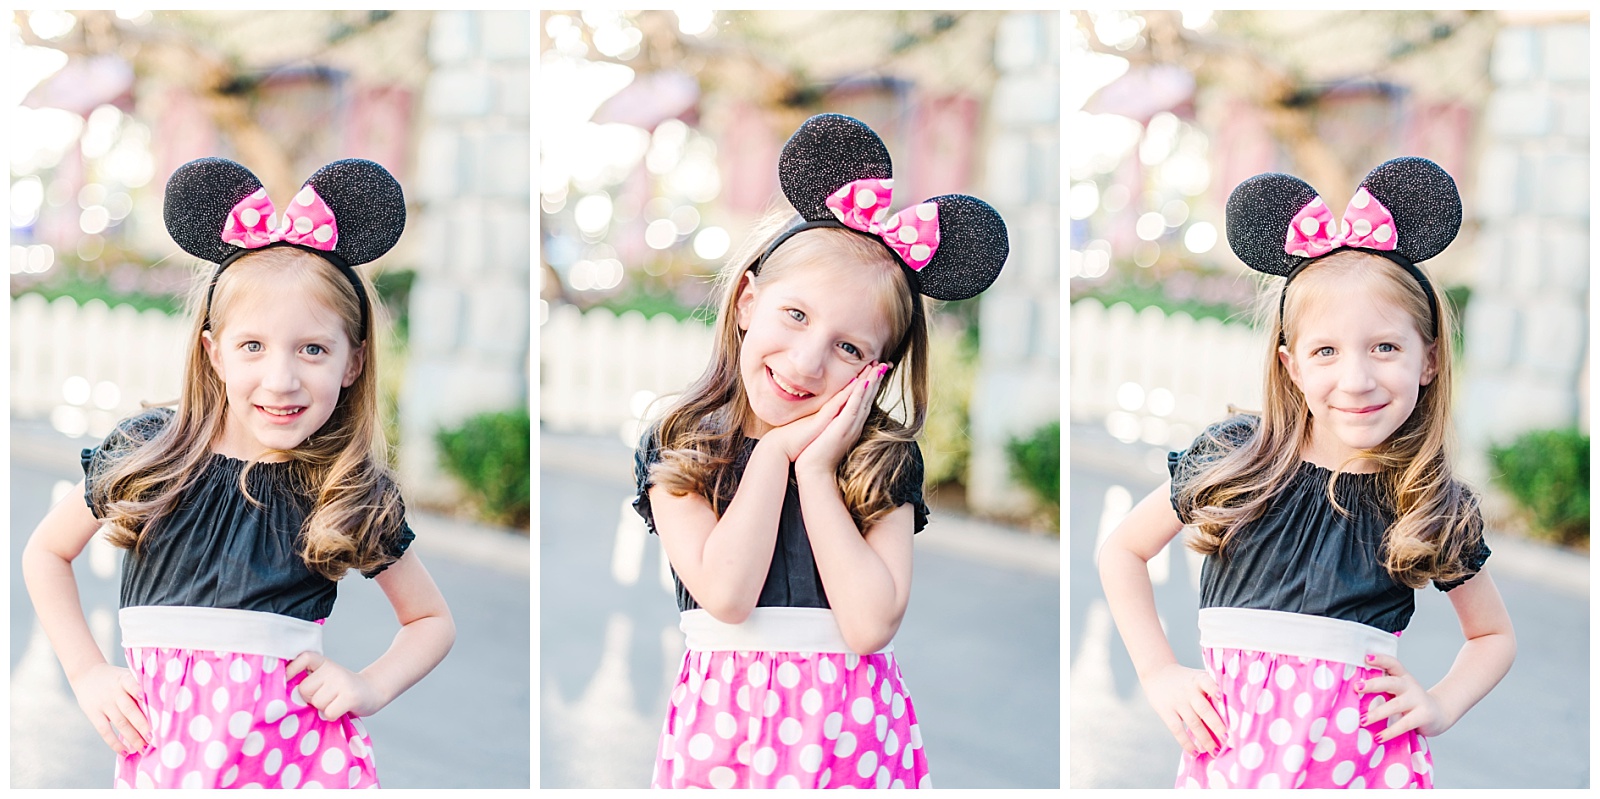 Disneyland Portrait Session.  Photography by Mollie Jane Photography.  To see more visit www.molliejanephotography.com